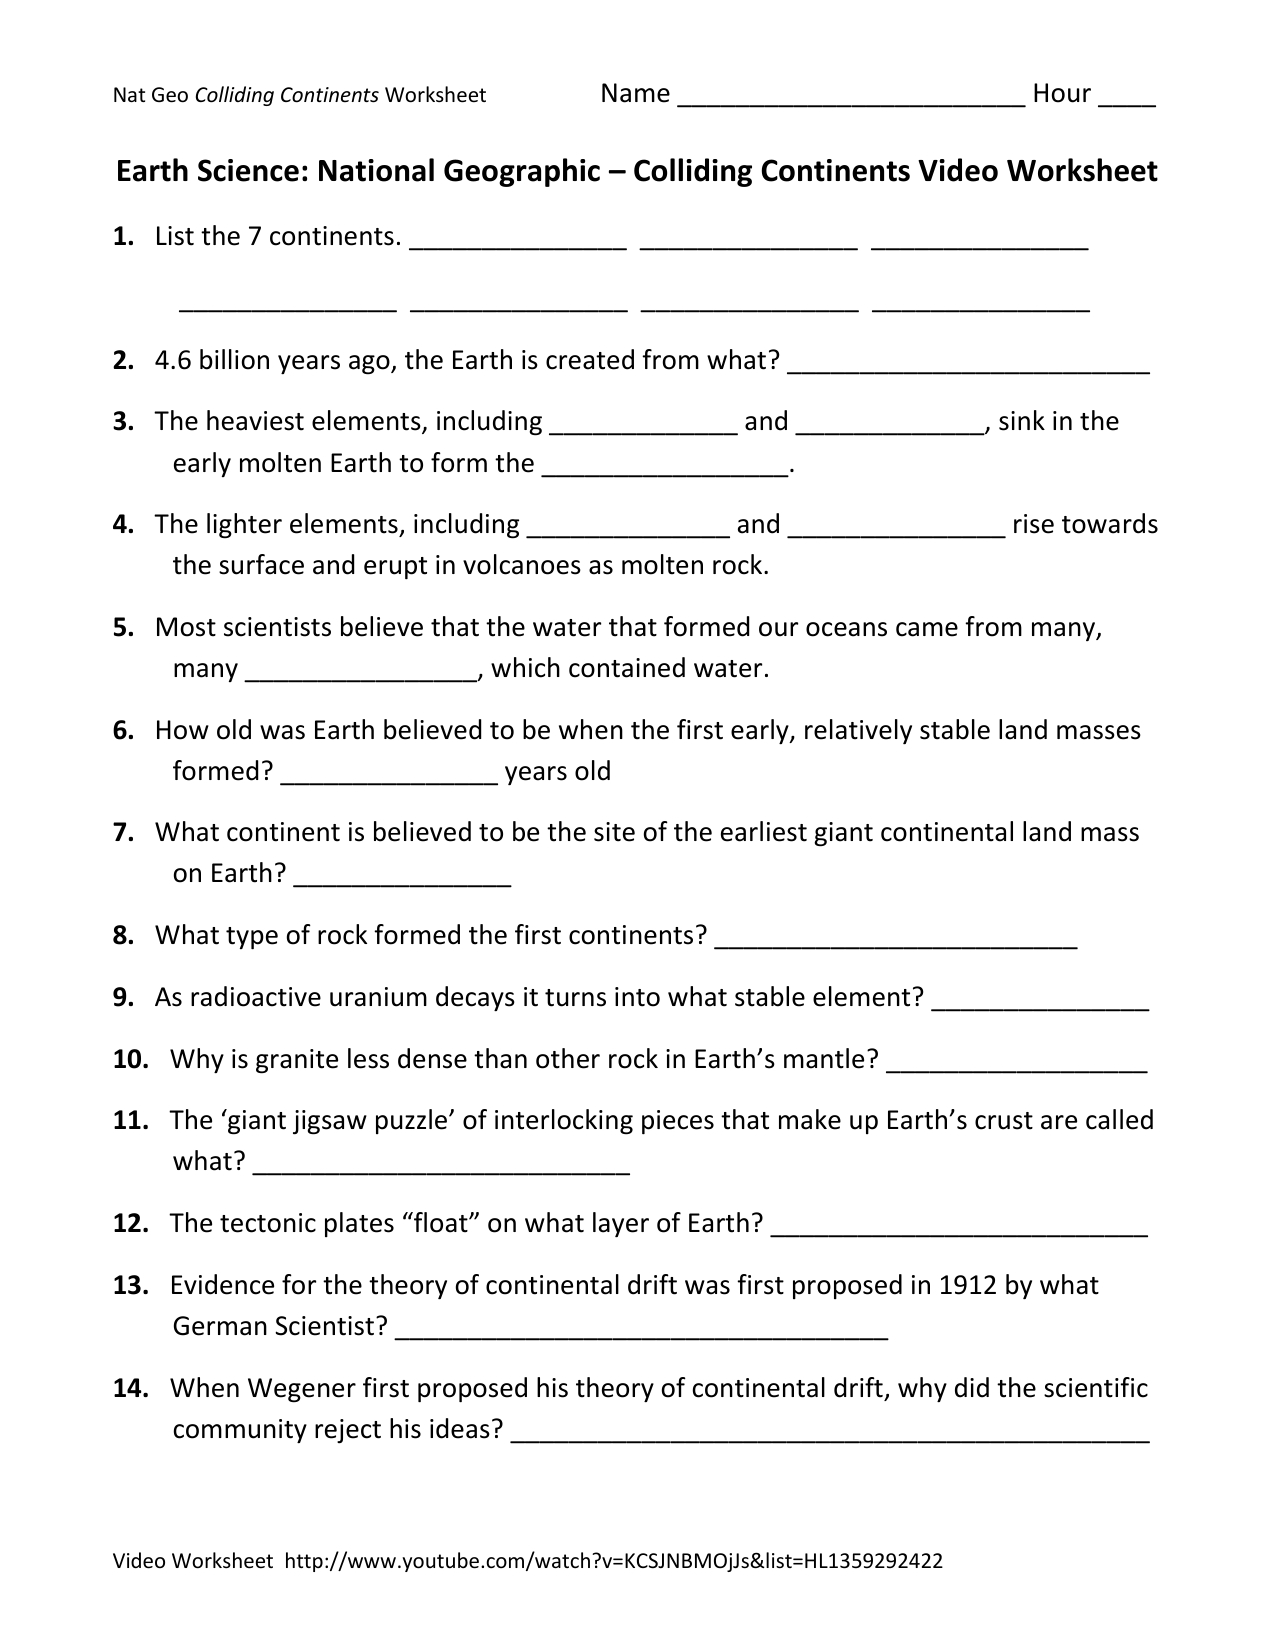 National Geographic – Colliding Continents Video With National Geographic Colliding Continents Video Worksheet Answer Key